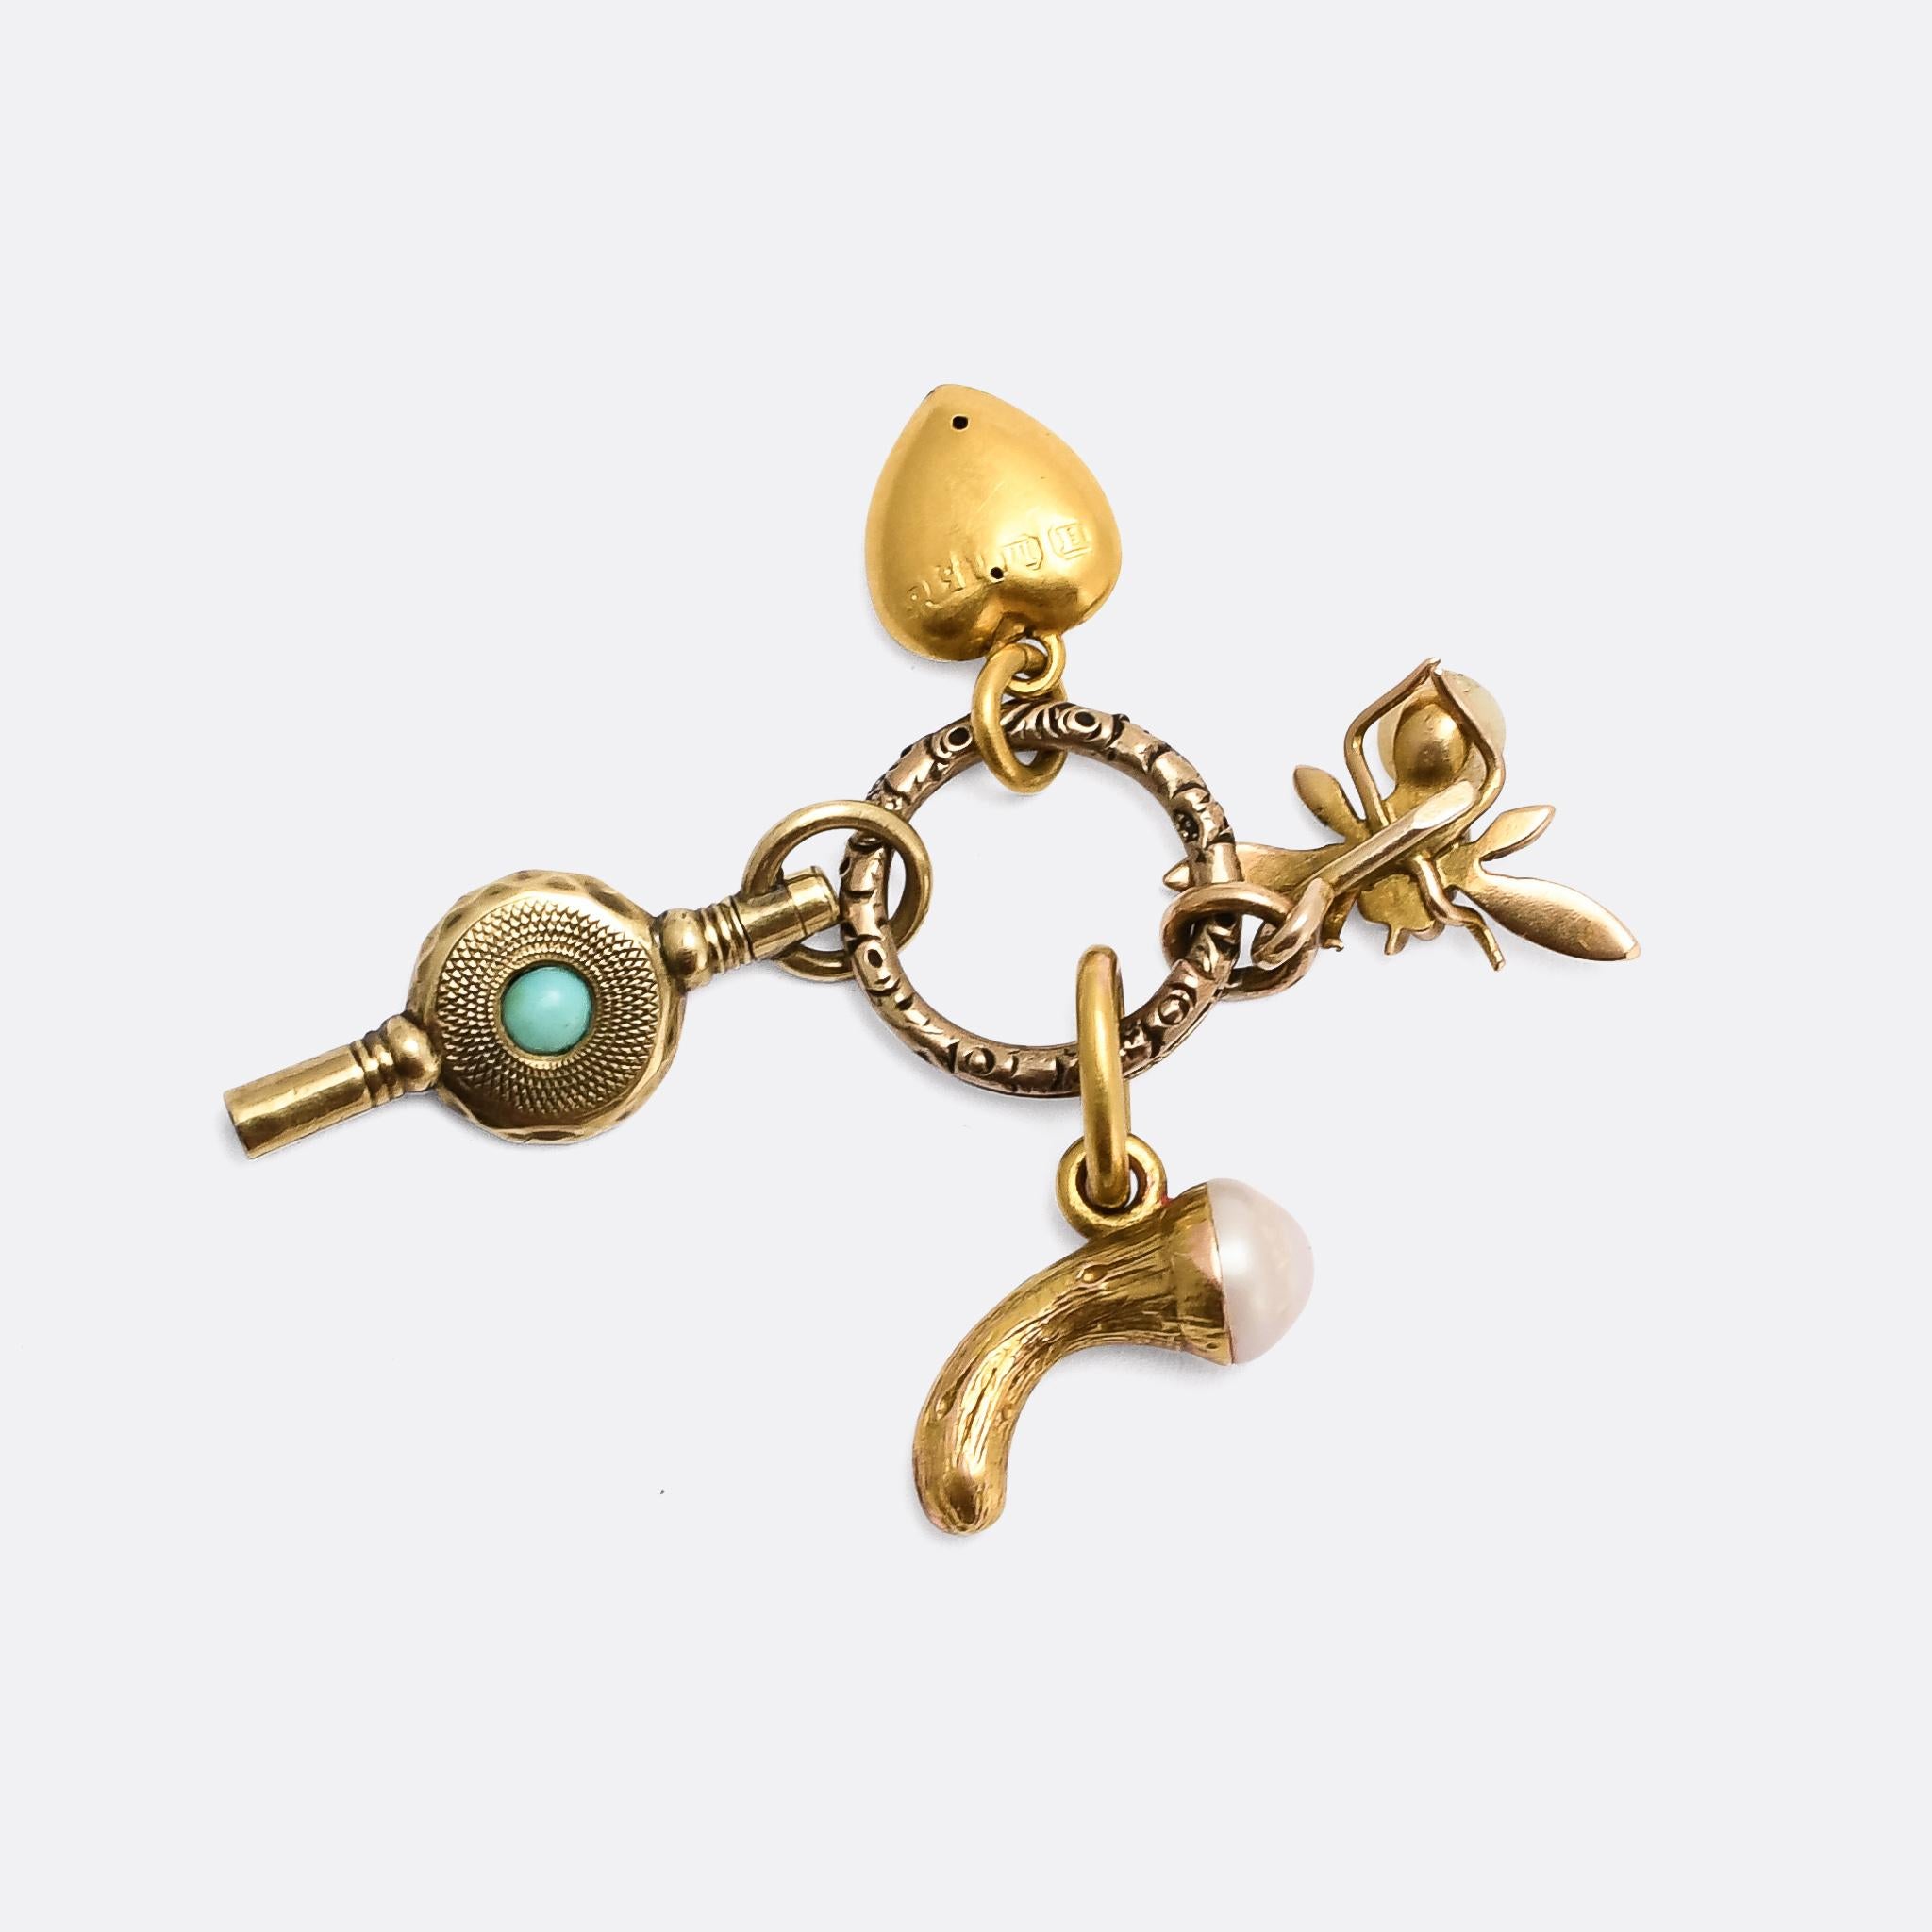 A collection of miniature charms with split ring, all dating from the 19th century. They include a gold heart, pearl, diamond and sapphire set bug, turquoise set watch key, and a cornucopia with pearl spilling out the end. The split ring features